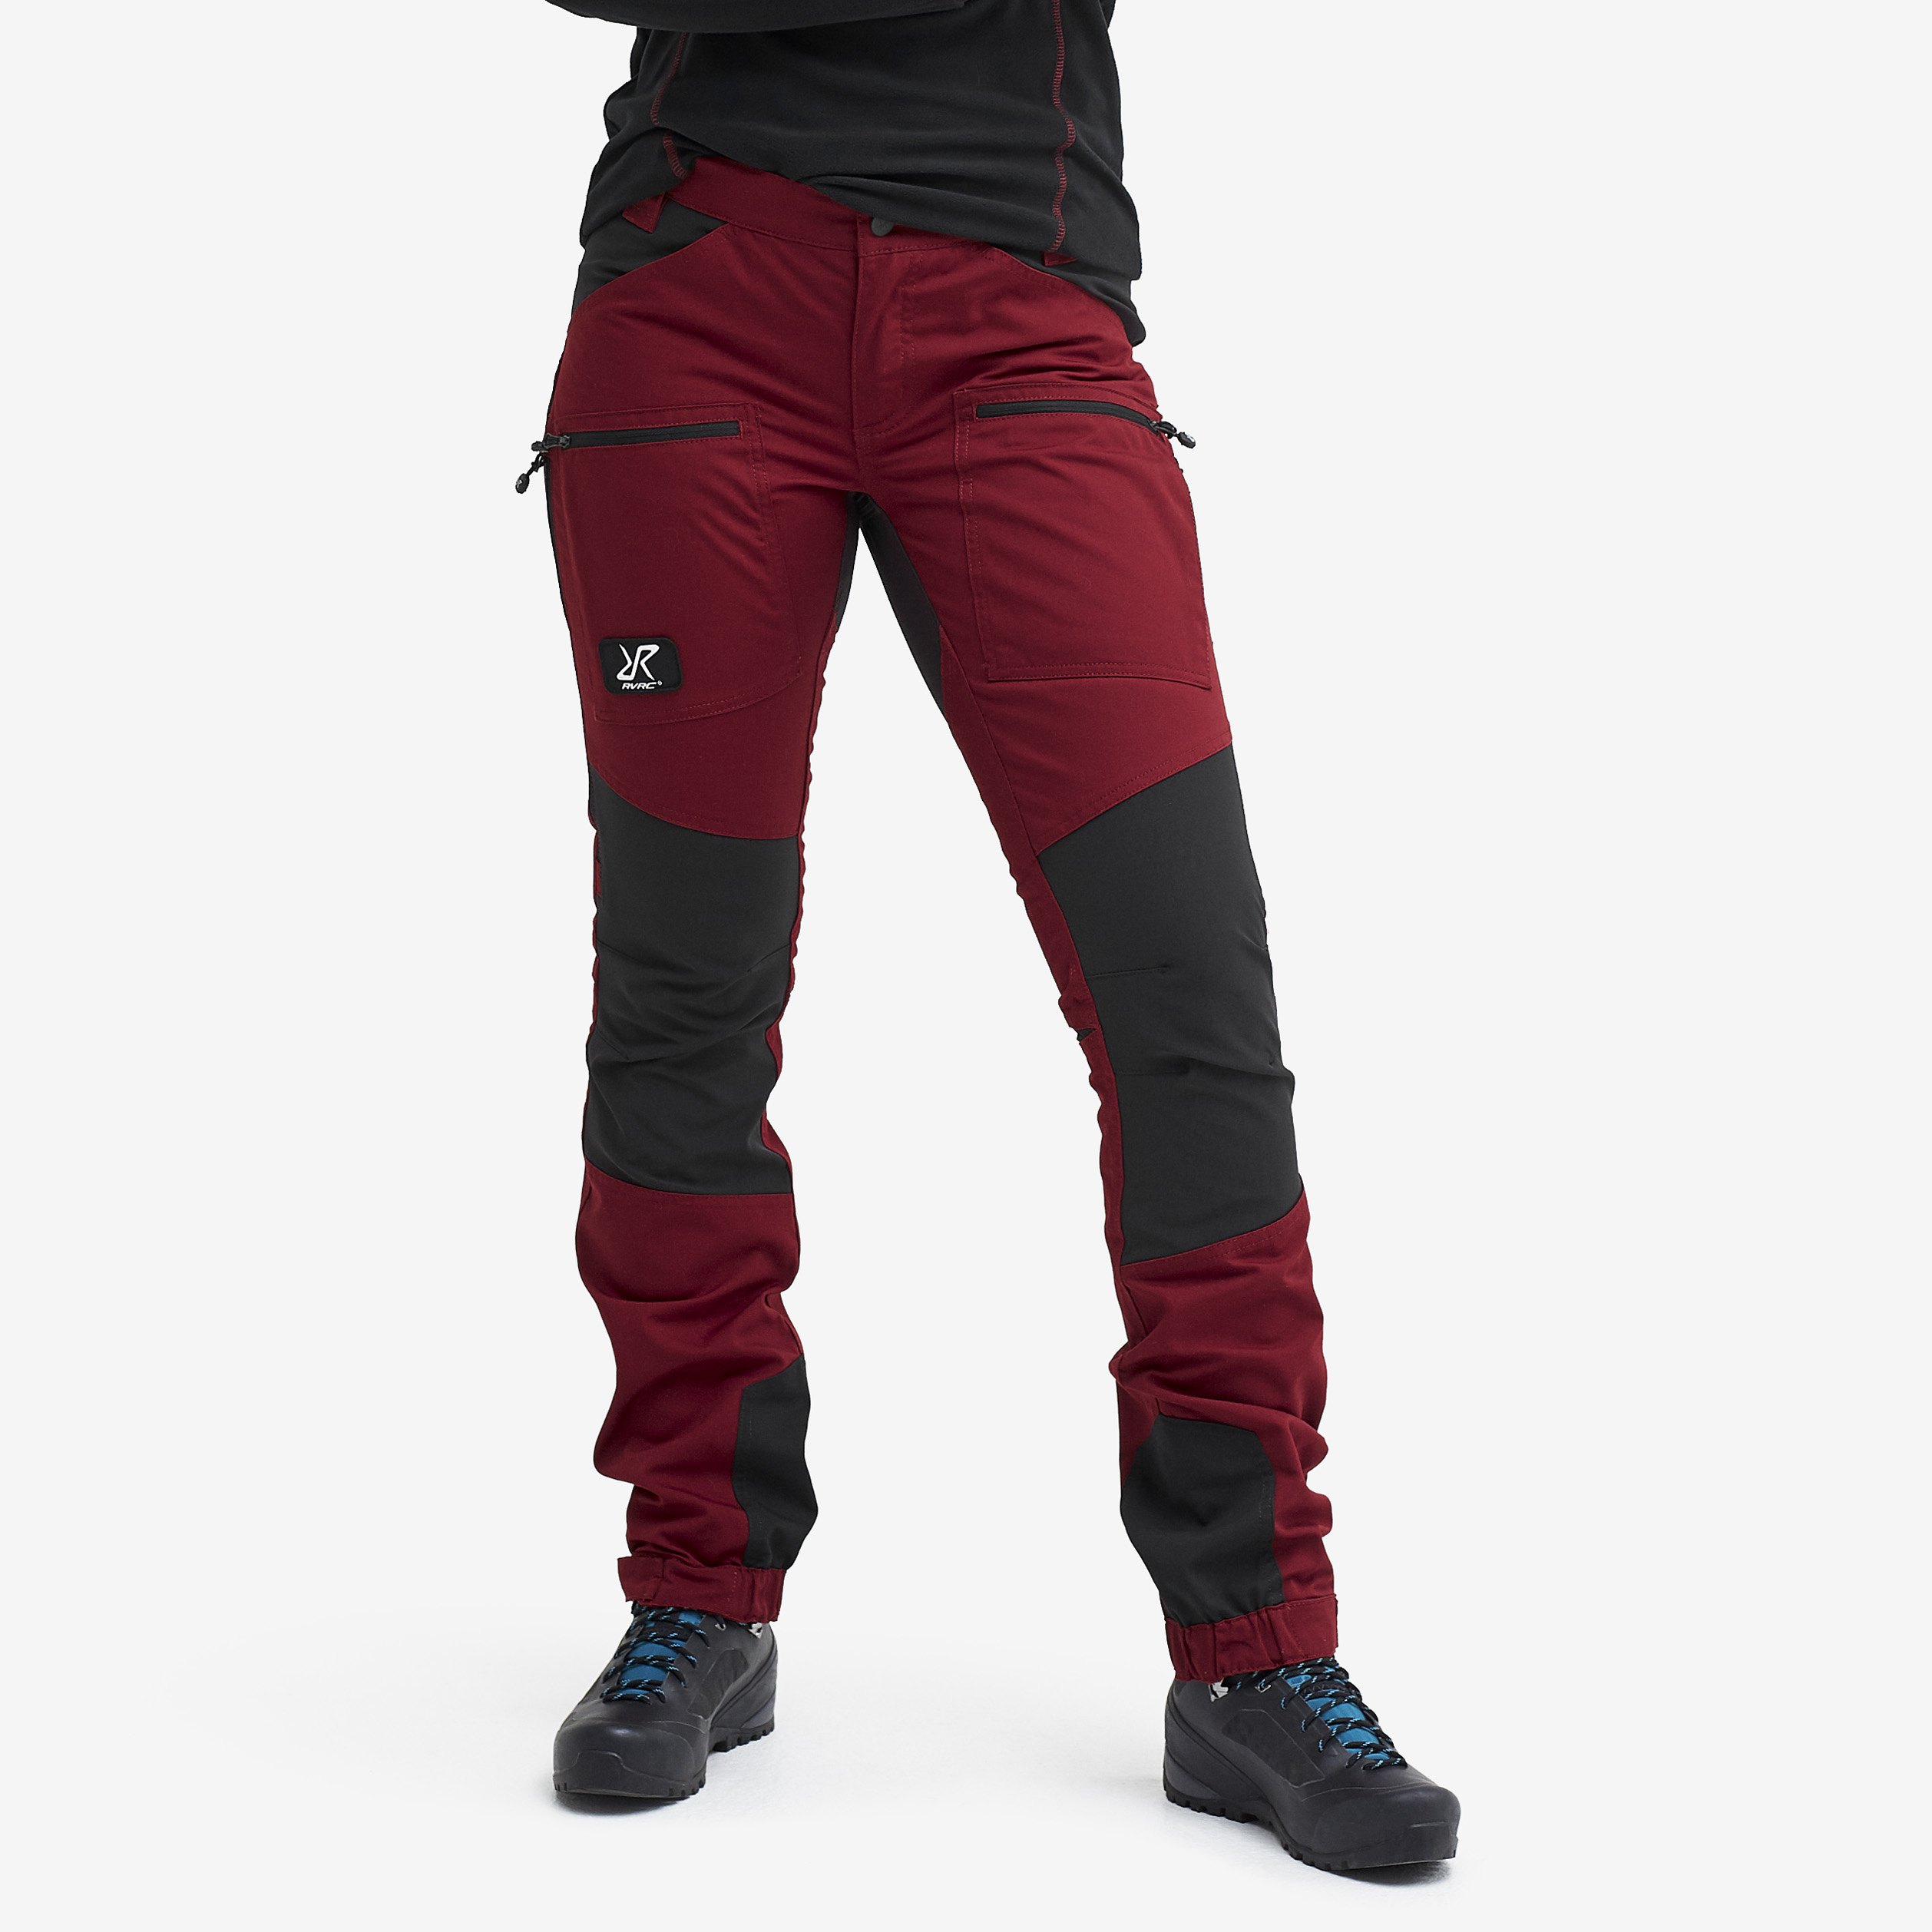 Nordwand Pro Pants Wine Red